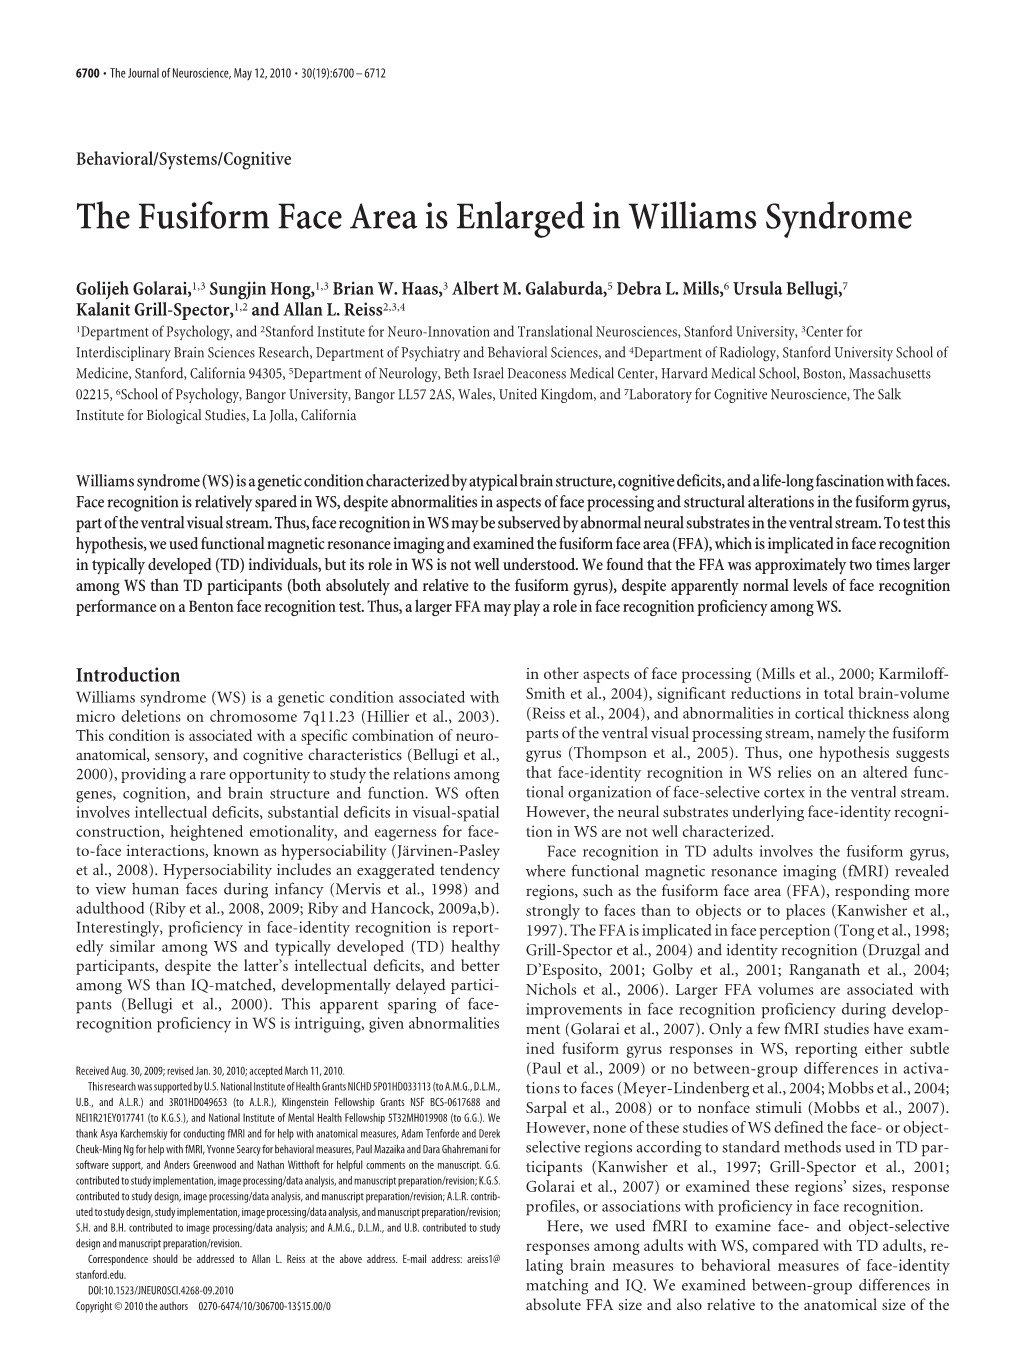 The Fusiform Face Area Is Enlarged in Williams Syndrome